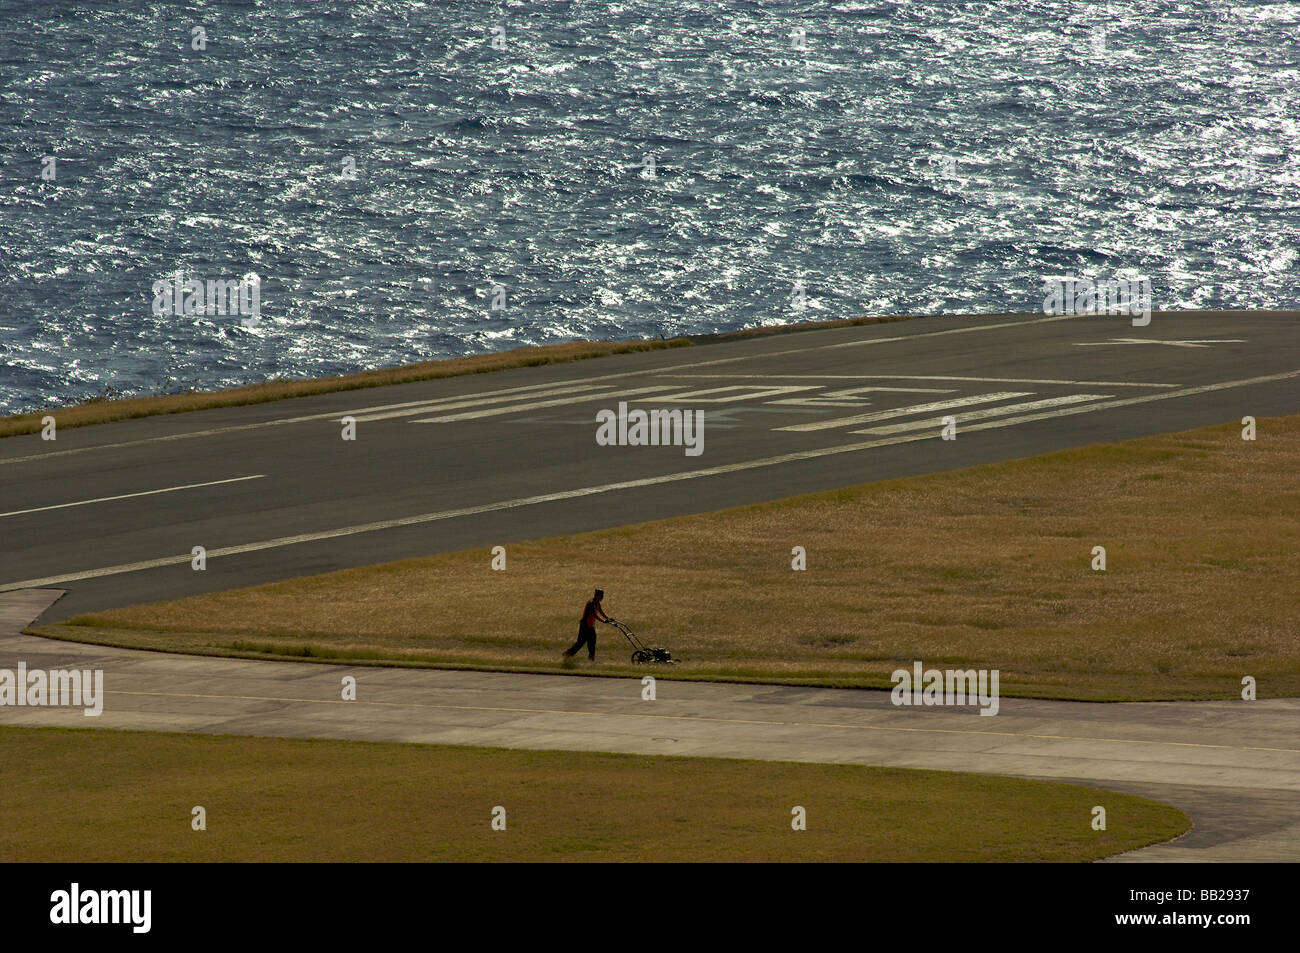 Saba airport the shortest commercial runway in the world Stock Photo